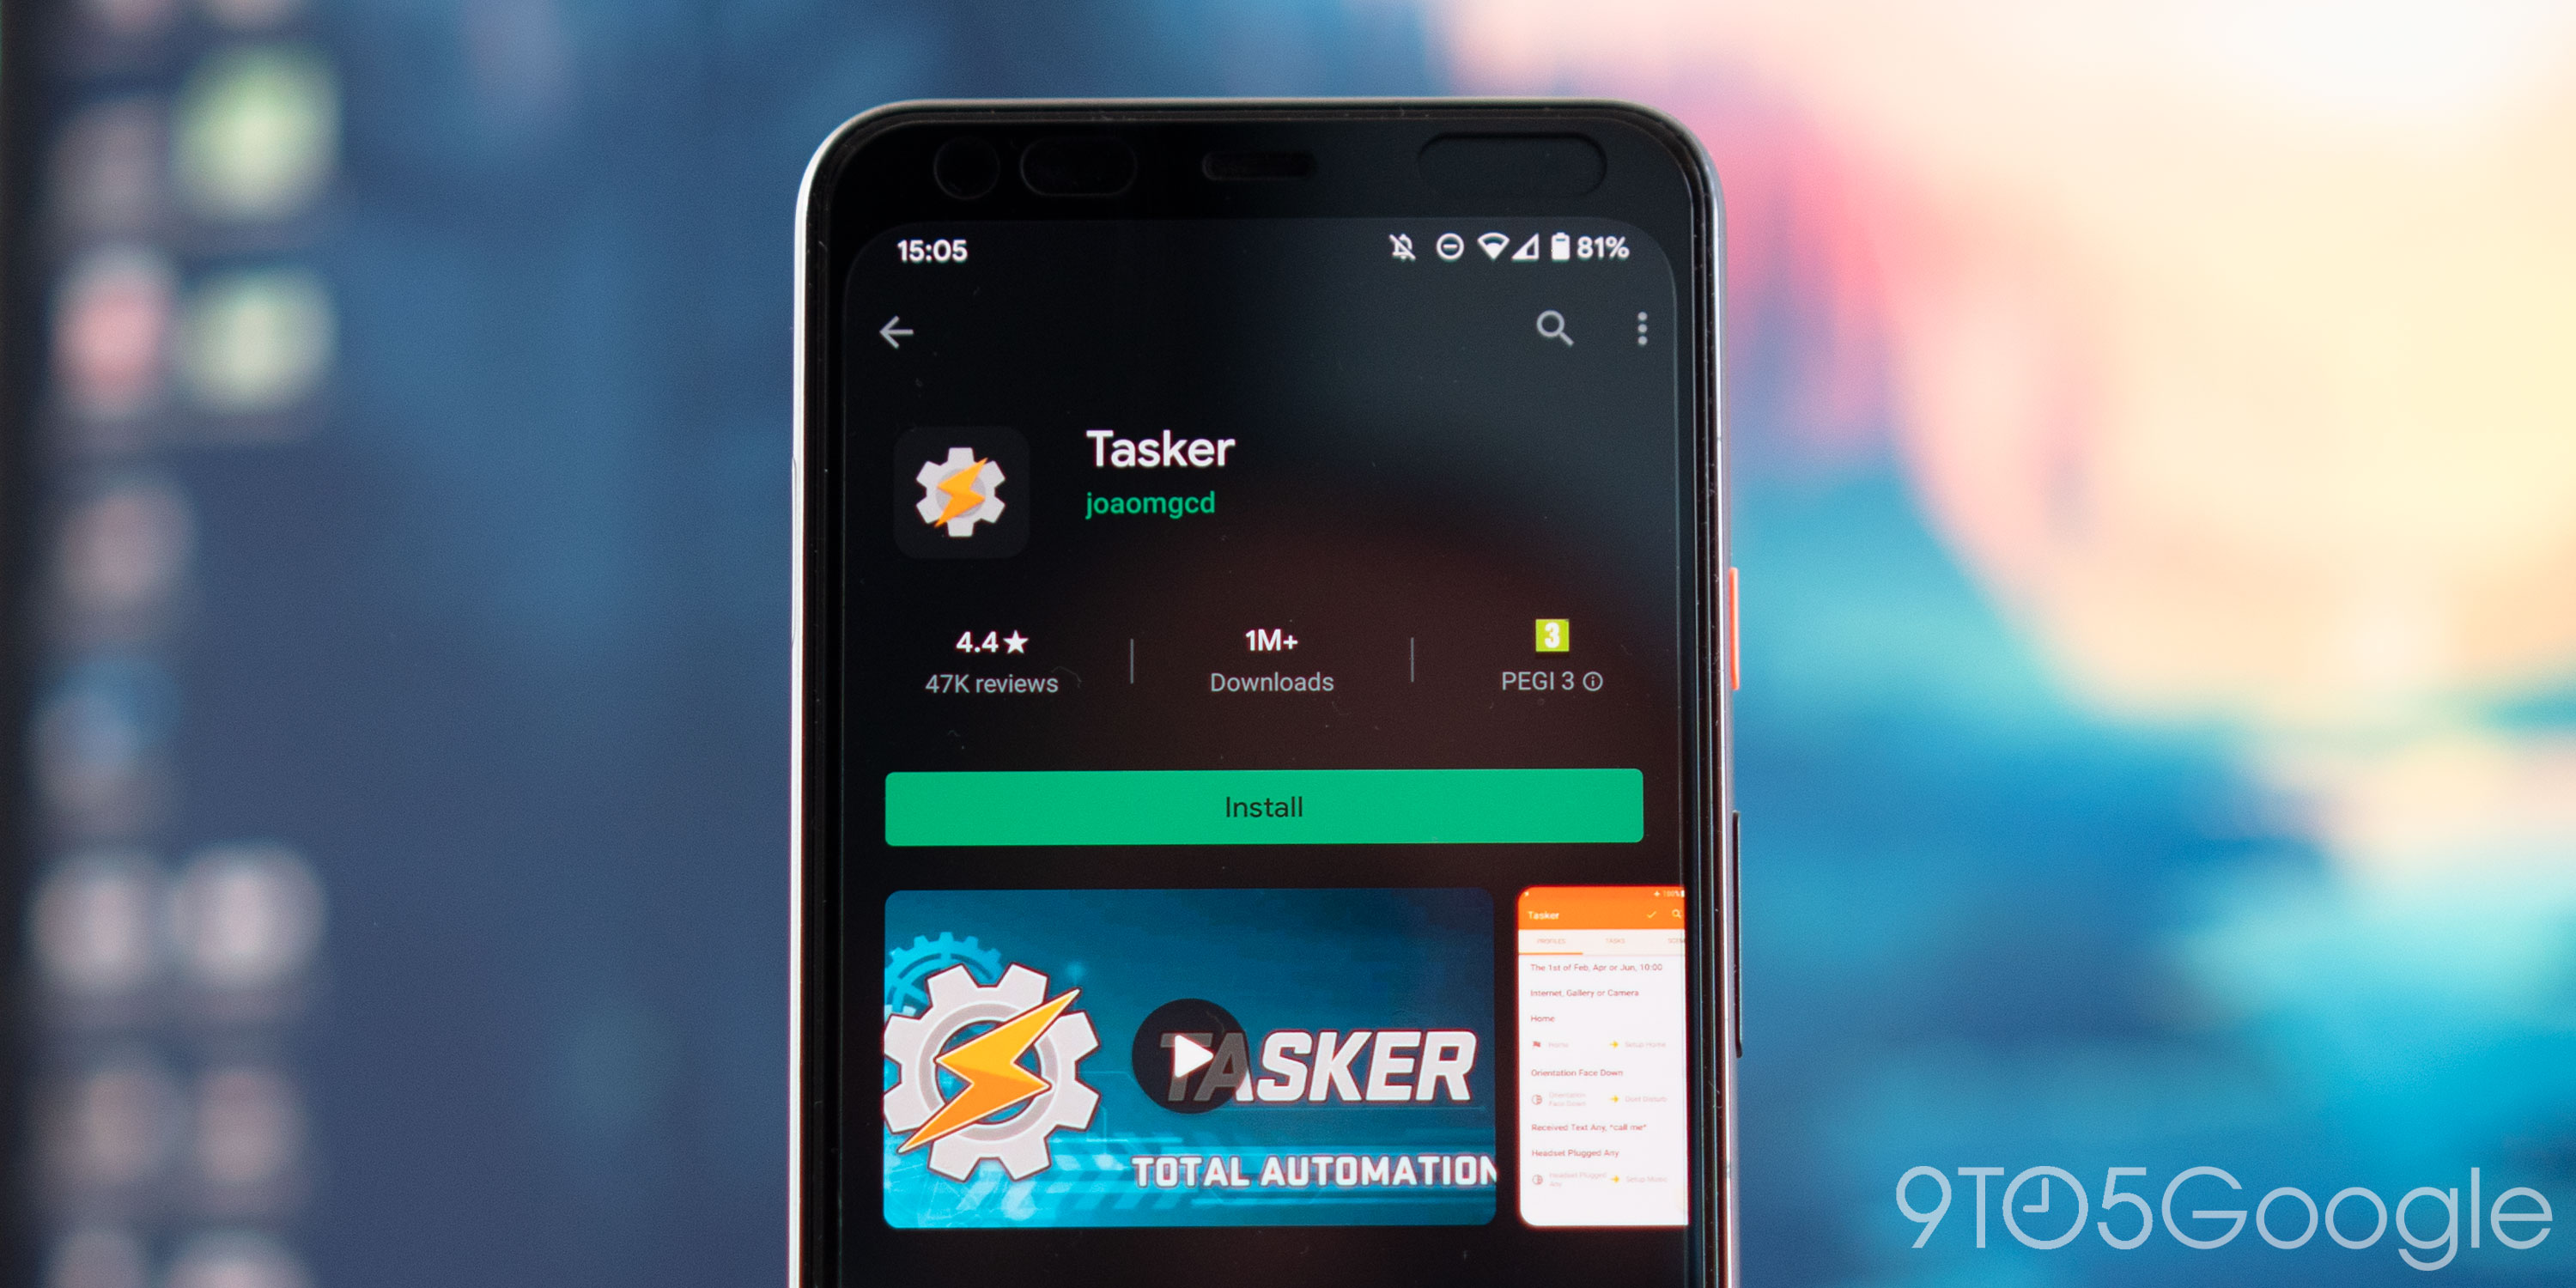 Tasker 5.11 ability automatically block calls, more - 9to5Google